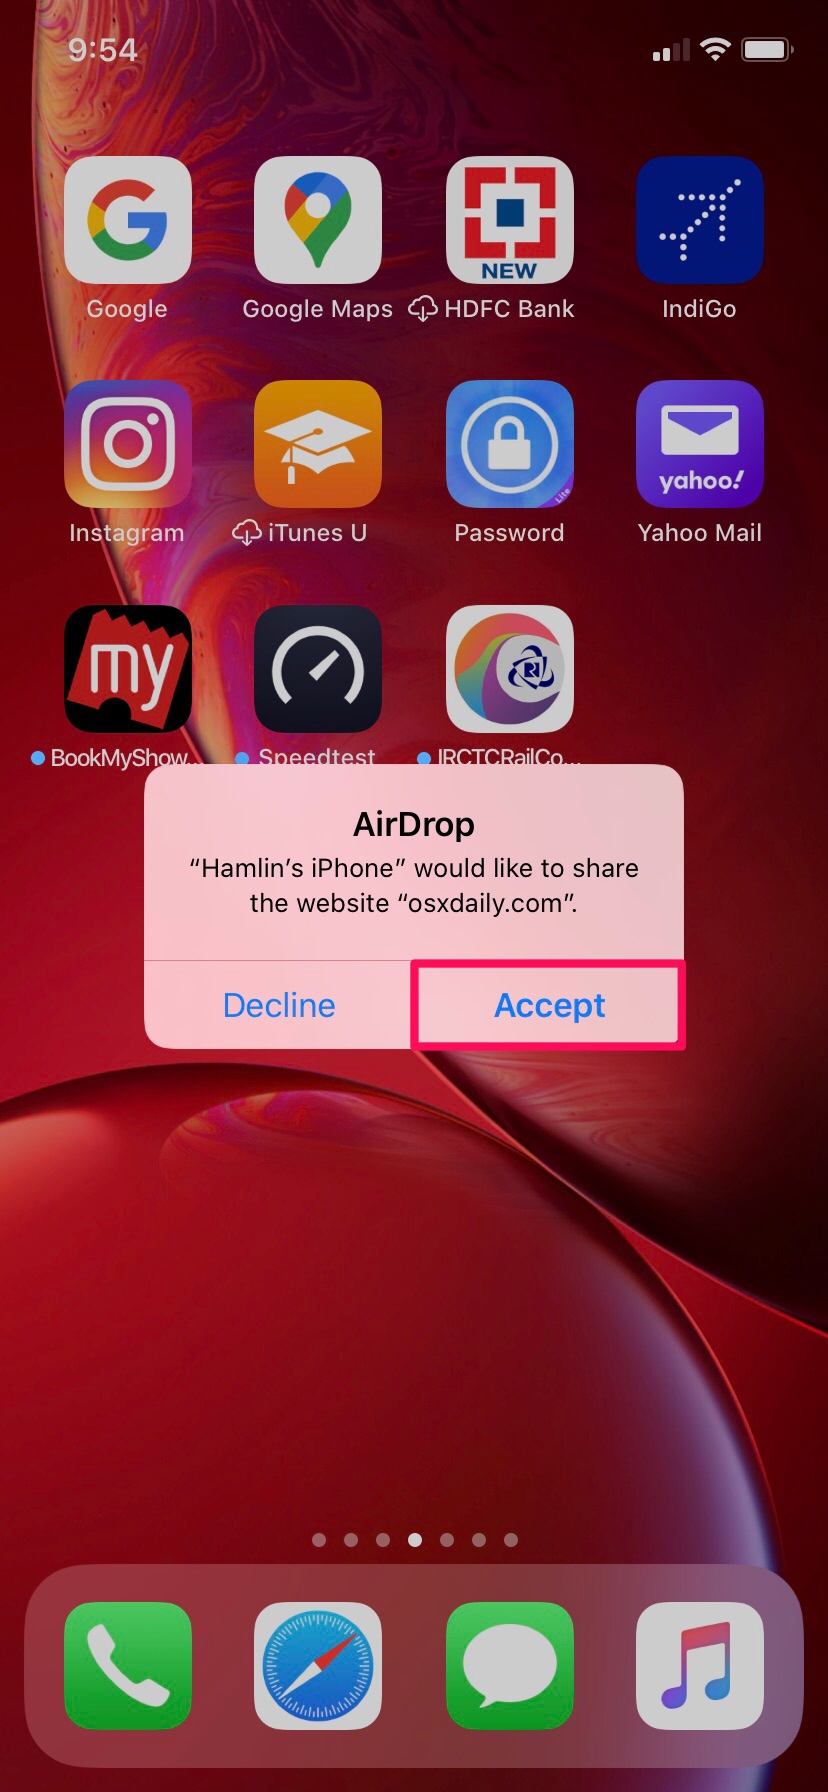 How to Use AirDrop on iPhone & iPad